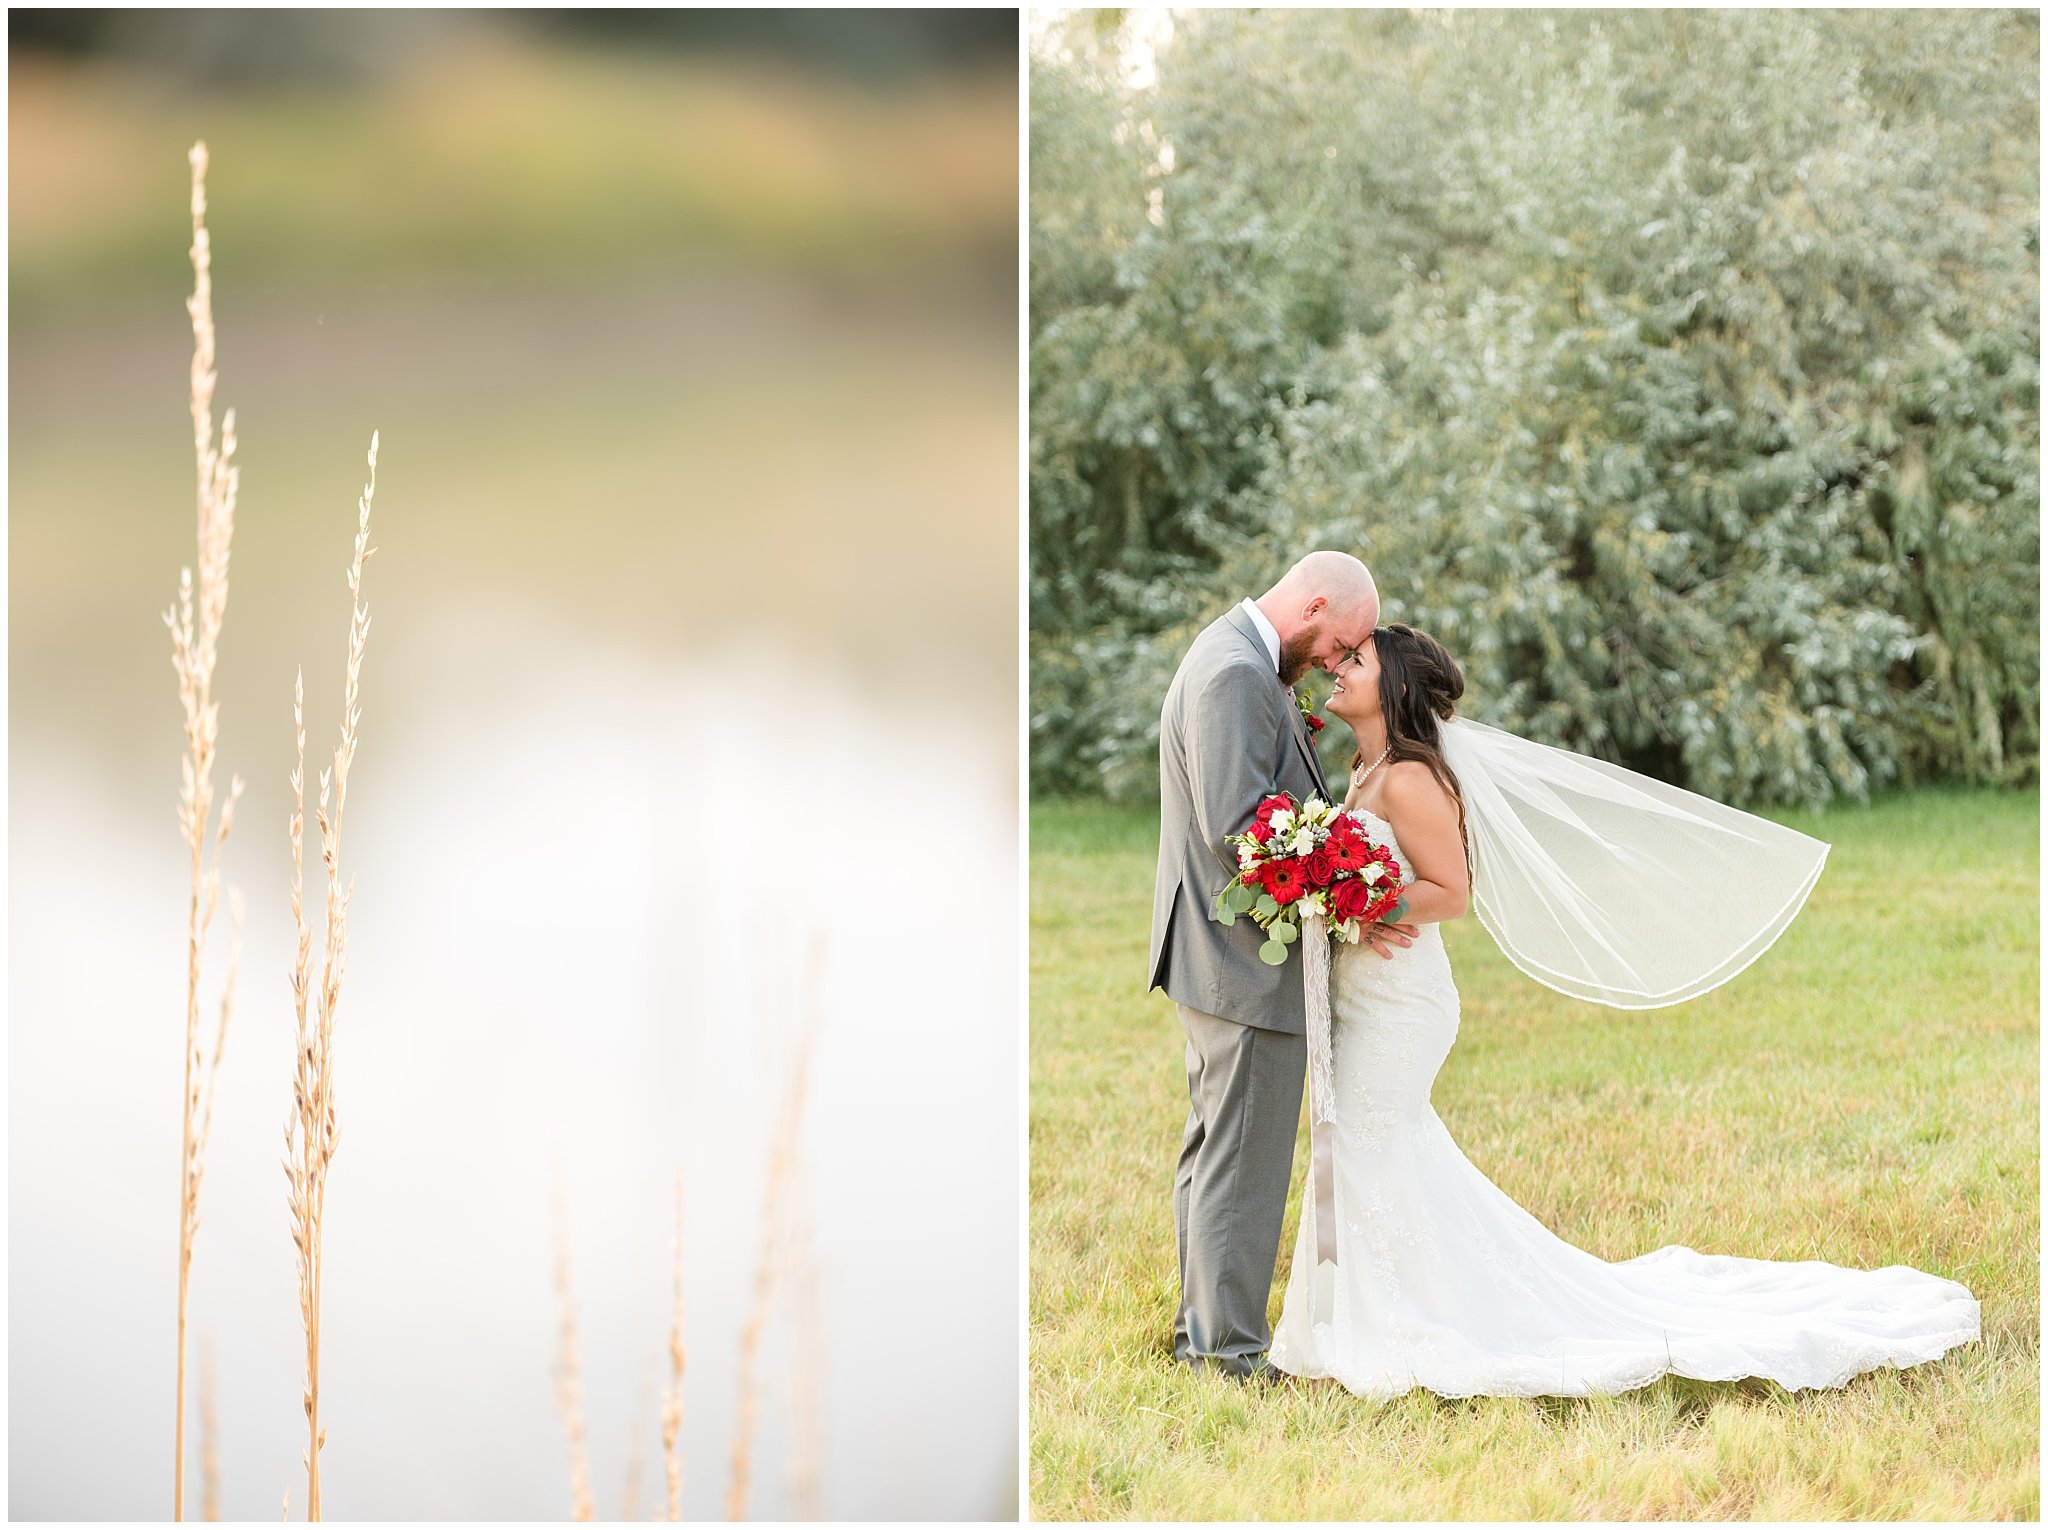 Bride and groom with a floating veil during sunset portraits | Red and Grey wedding | Davis County Outdoor Wedding | Jessie and Dallin Photography